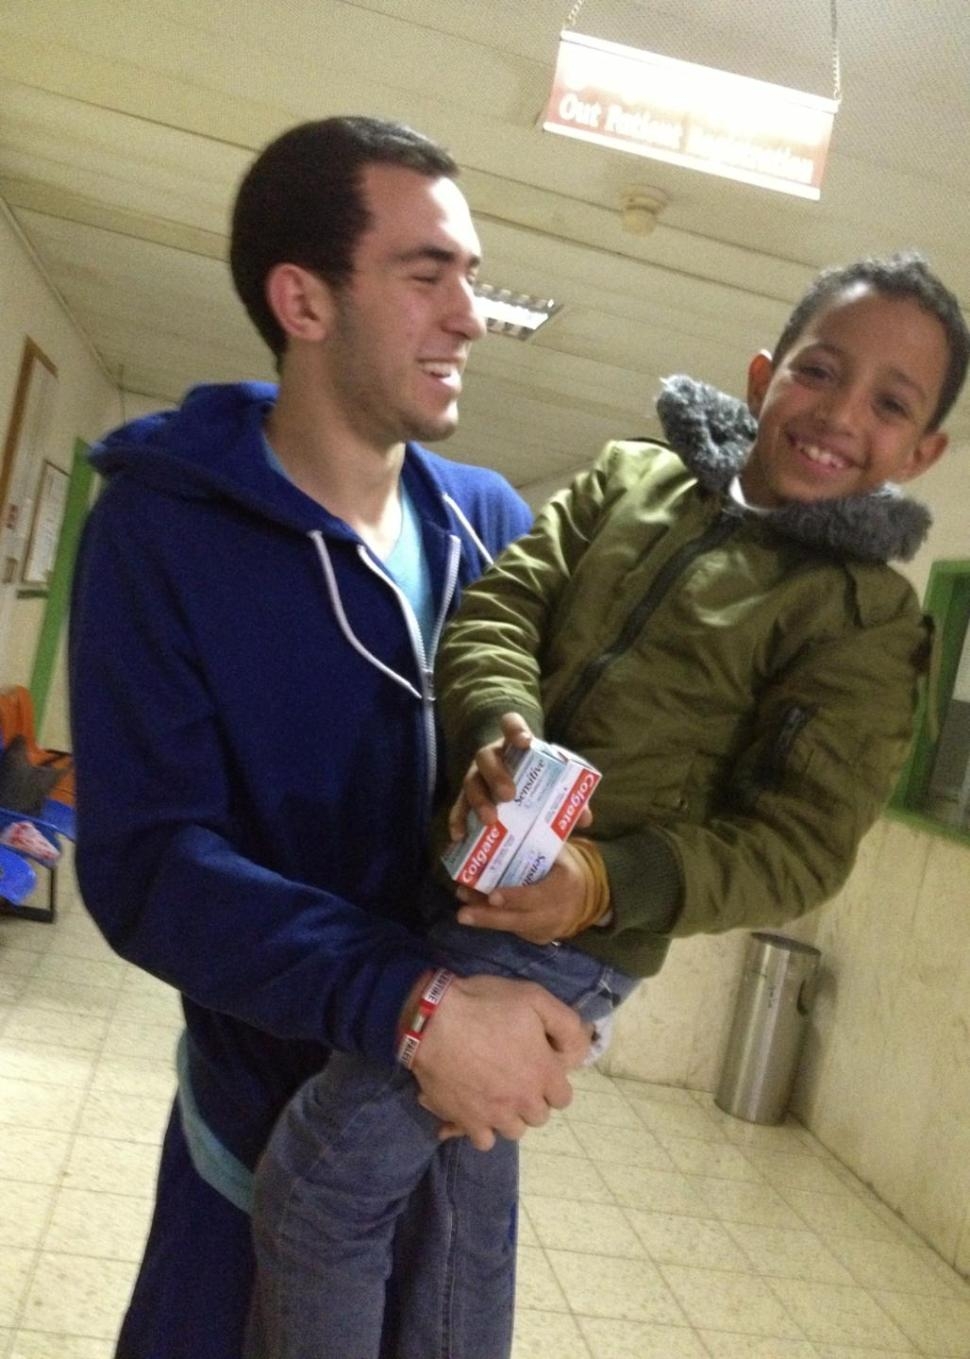 Chapel Hill shooting victim seen helping young Palestinian refugees in newly surfaced videoimage